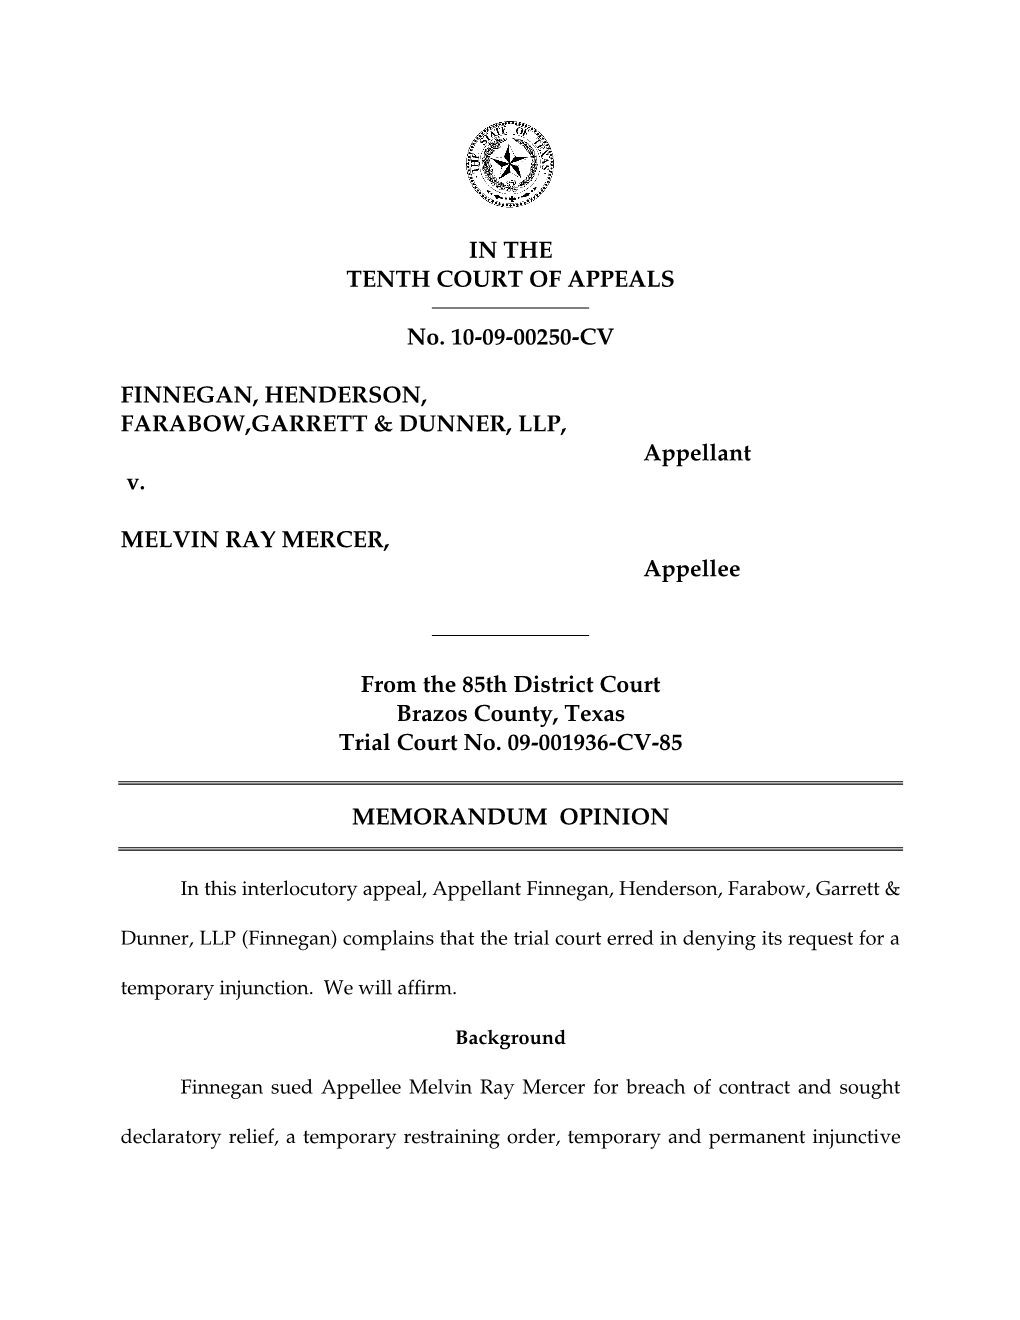 IN the TENTH COURT of APPEALS No. 10-09-00250-CV FINNEGAN